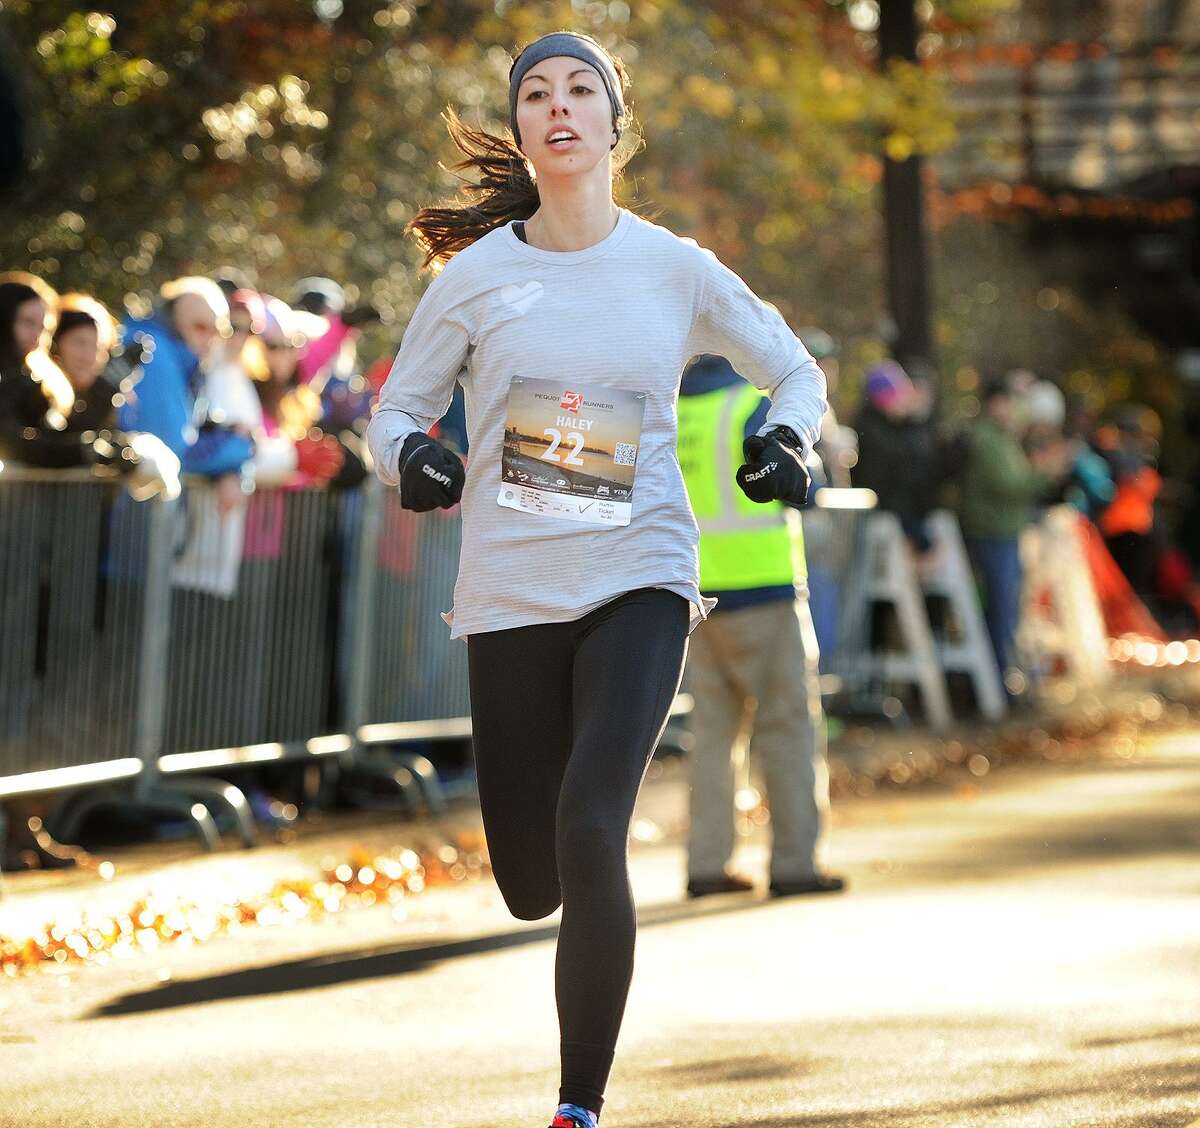 Haley Abing, of Boston, crosses the finish line as the women's winner of the annual Pequot Runners 5-mile Thanksgiving Day Road Race in Fairfield, Conn. on Thursday, November 23, 2017. Over 4000 runners registered for this year's race.